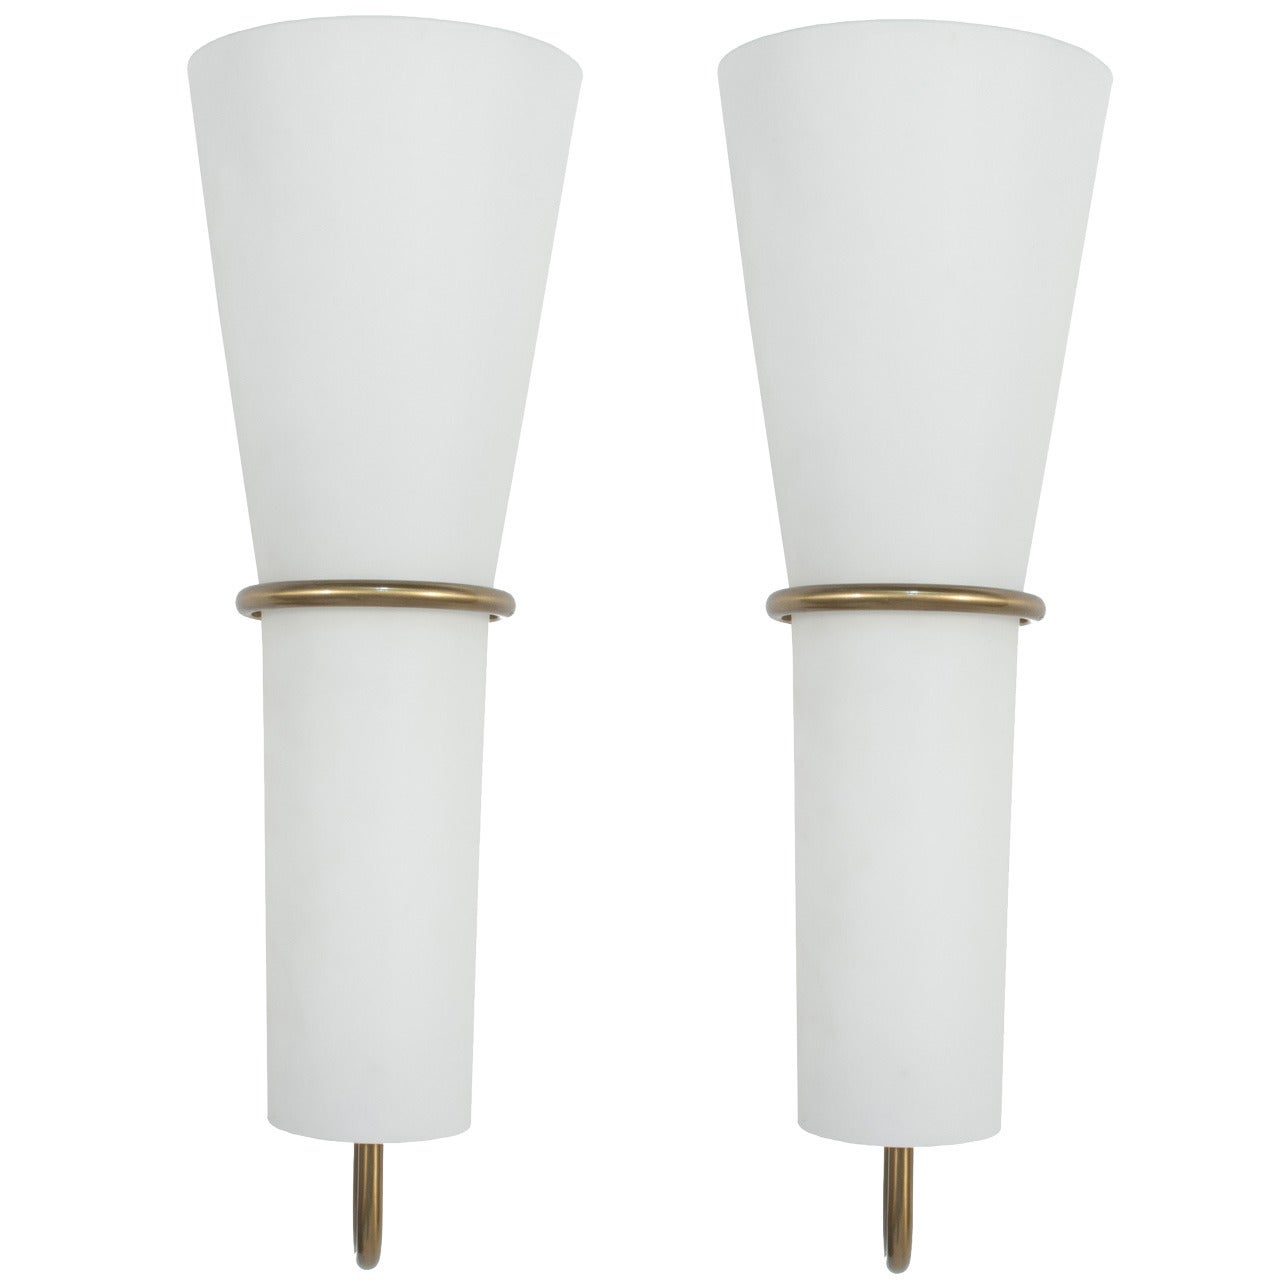 Pair of Sconces by Hans Agne Jakobsson